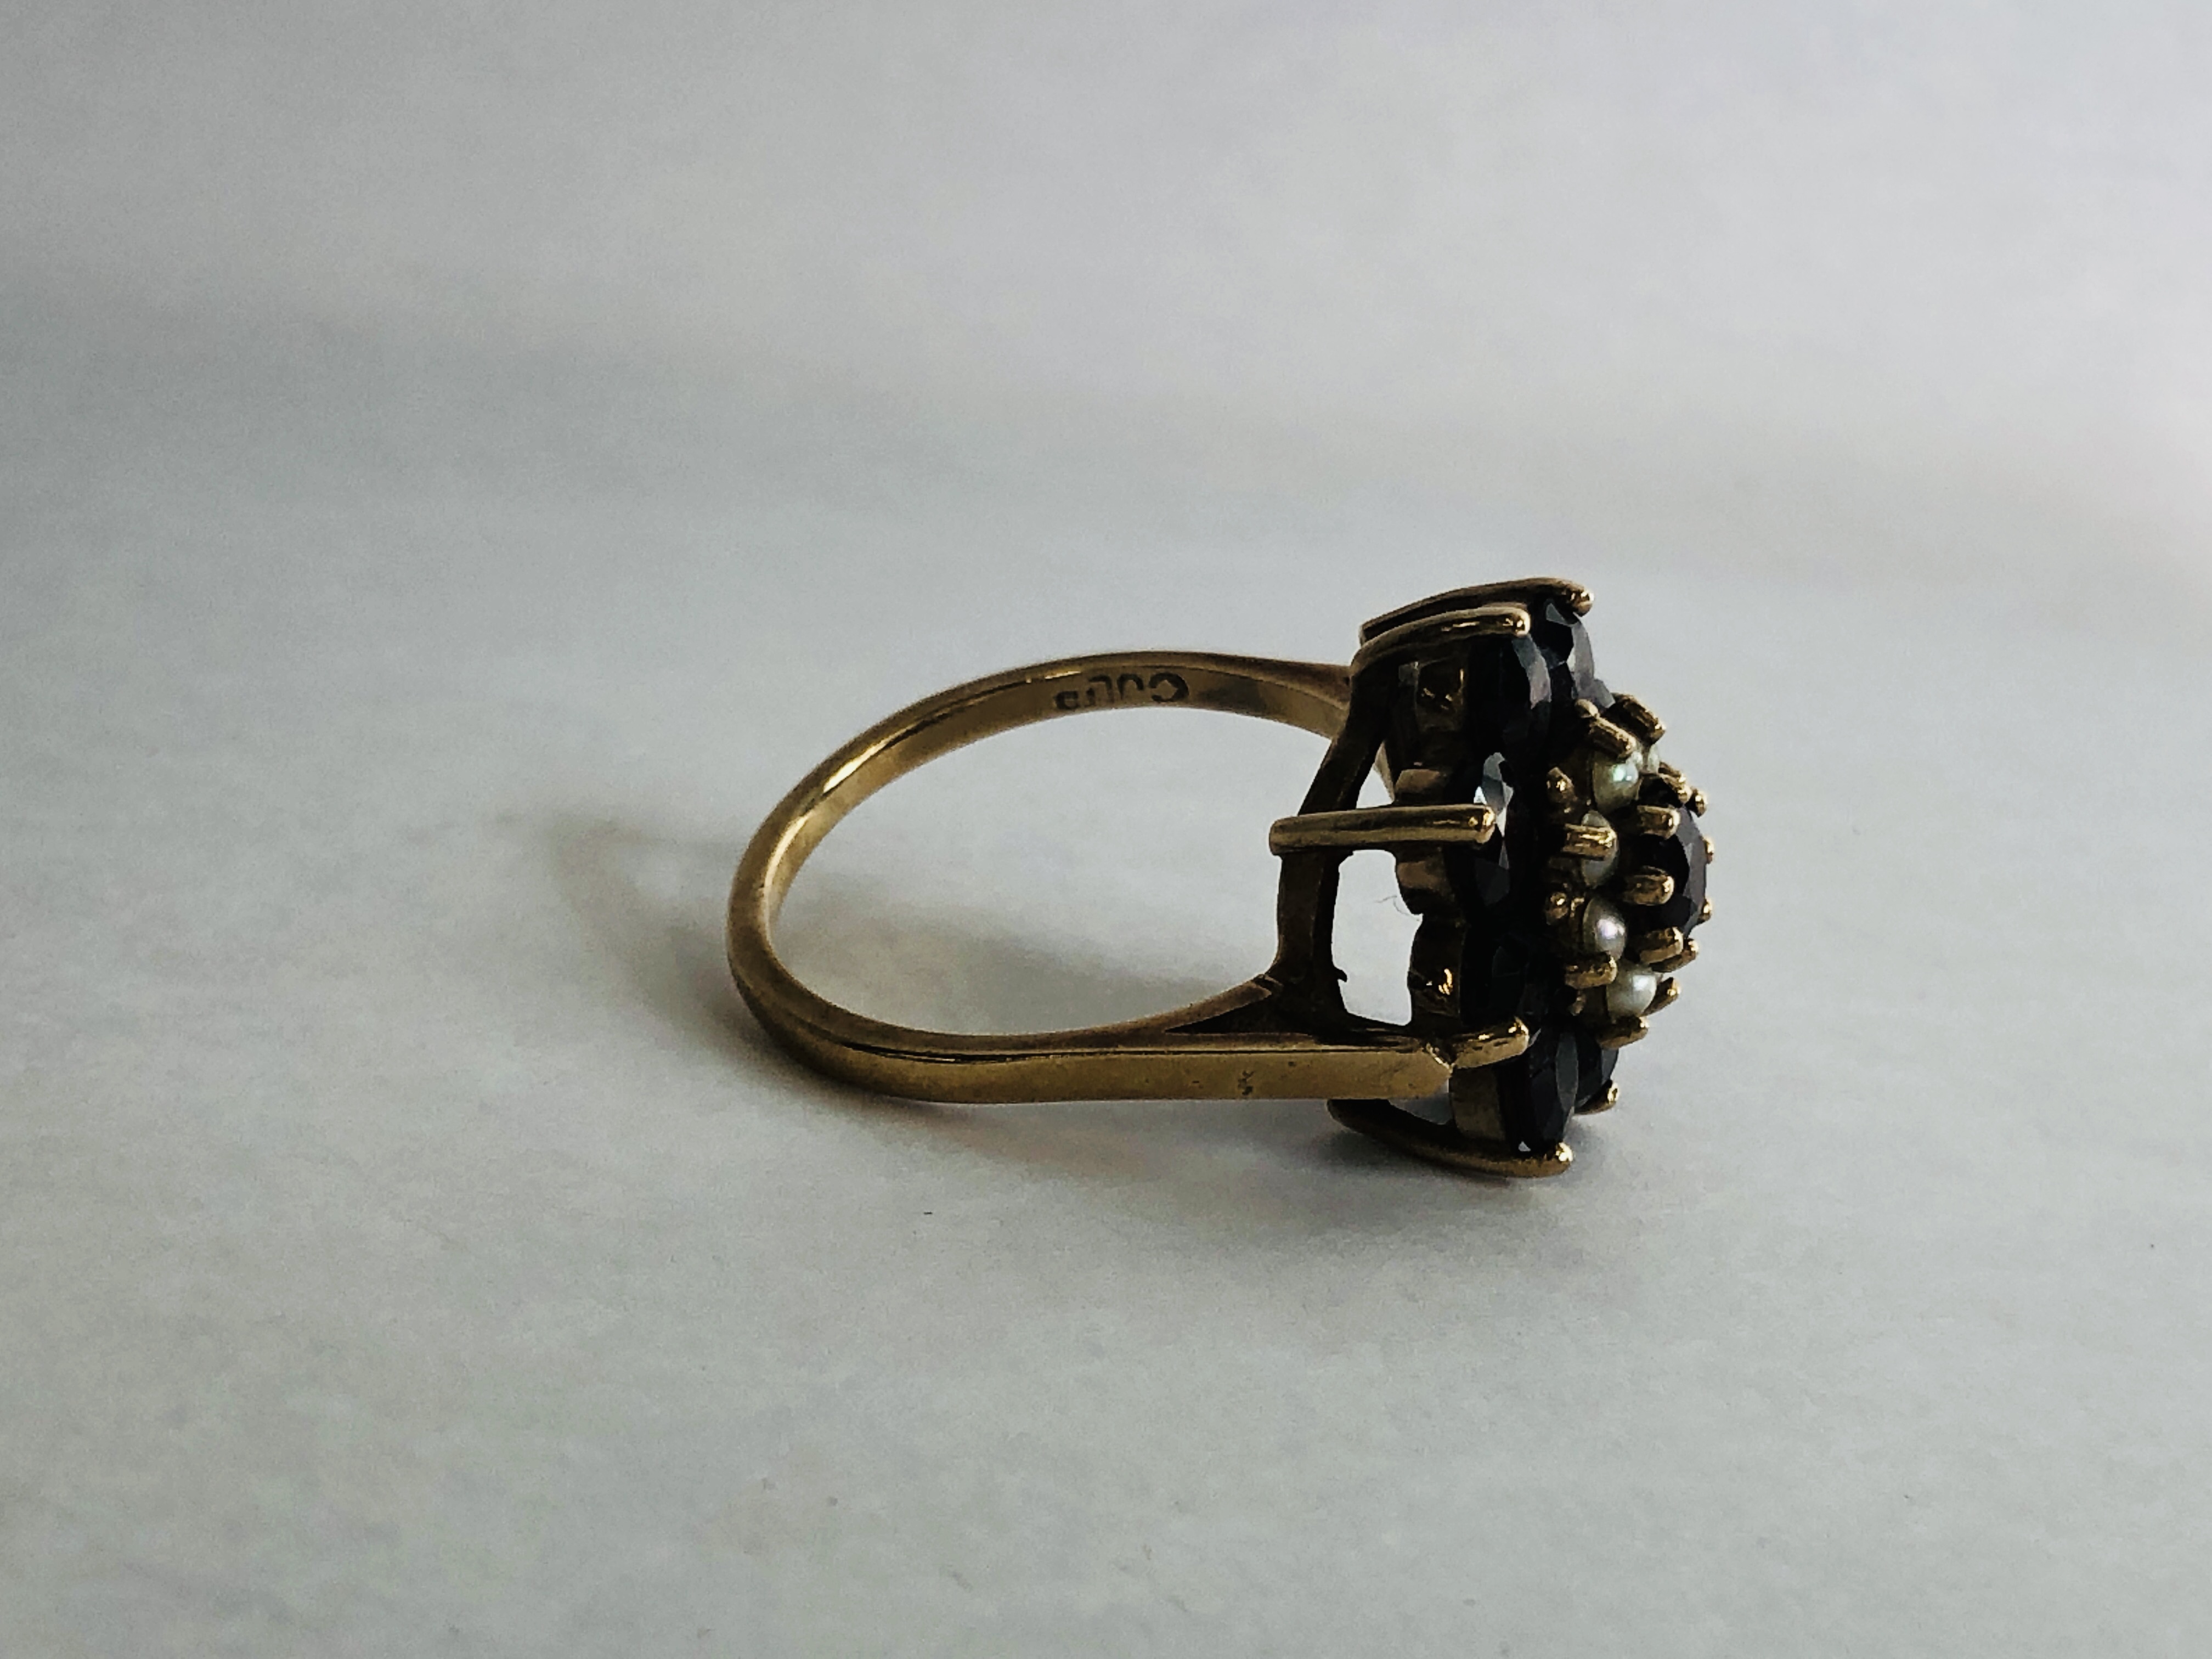 9CT GOLD LADIES RING, FLOWER HEAD DESIGN SET WITH GARNETS AND SEED PEARLS (1 SEED PEARL MISSING). - Image 5 of 9